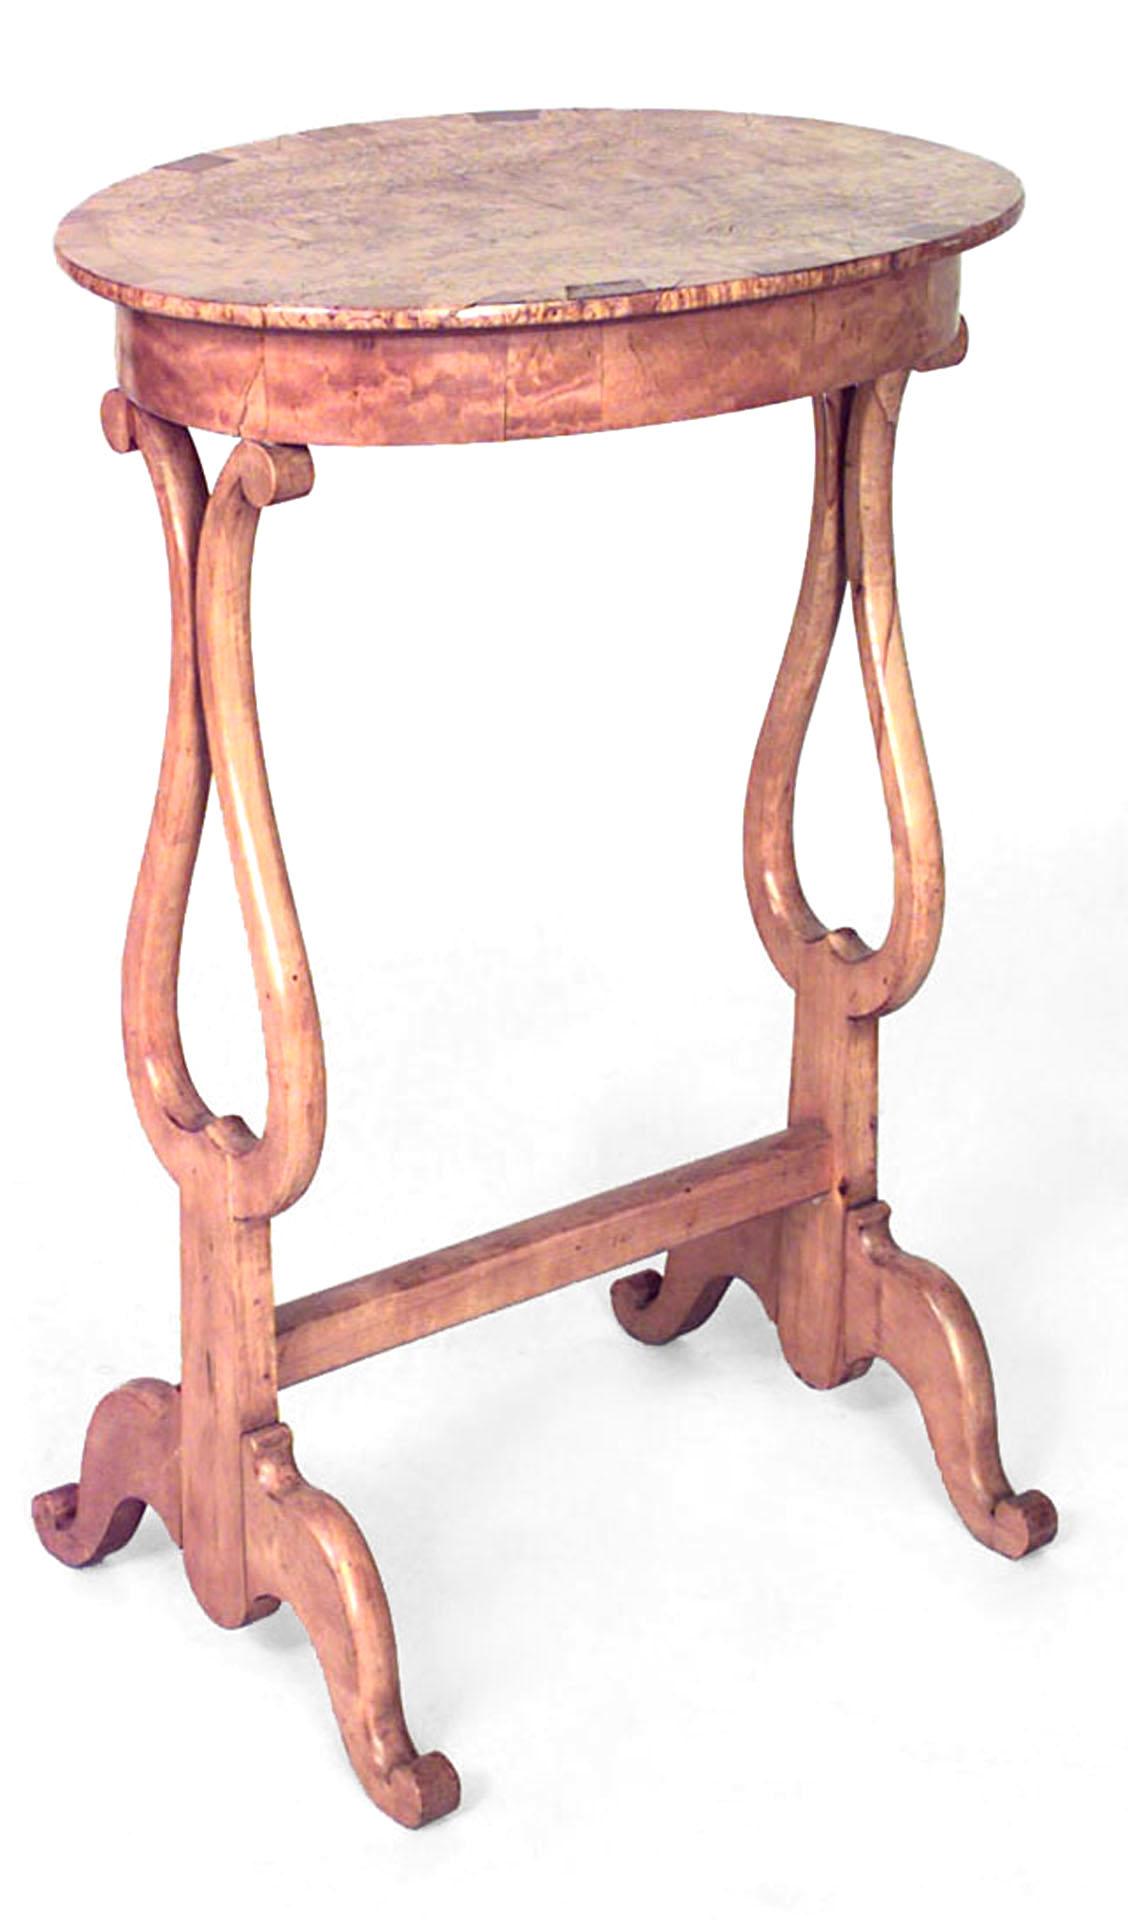 North European Biedermeier (Possibly Russian, Mid-19th Century) Karelian birch & fruitwood side table with oval top on lyre form legs joined by a stretcher.
